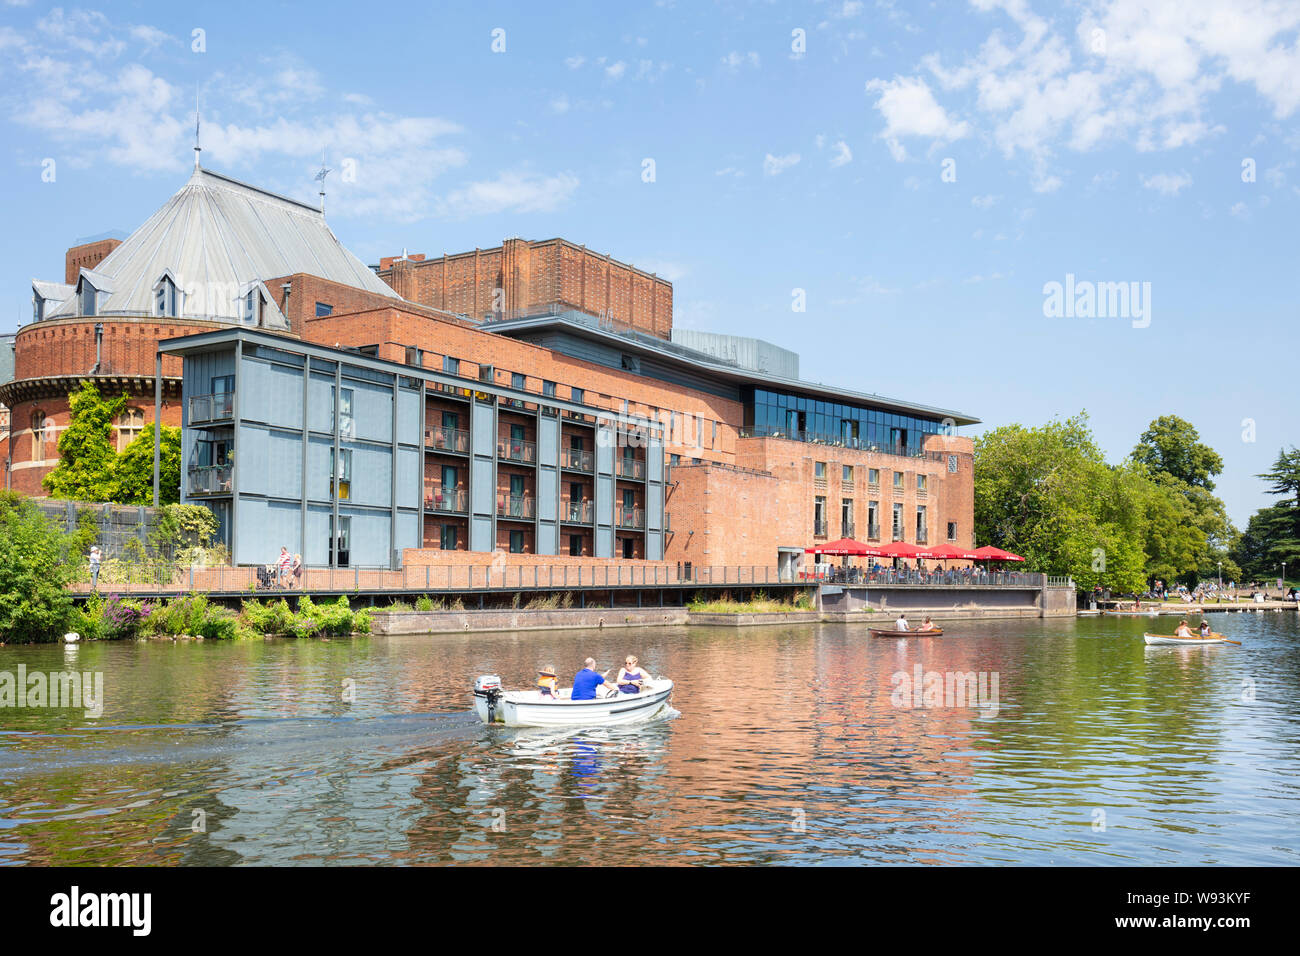 Small boat passing the RSC theatre Royal Shakespeare company theatre beside the River Avon Stratford upon avon Warwickshire England UK GB EU Europe Stock Photo